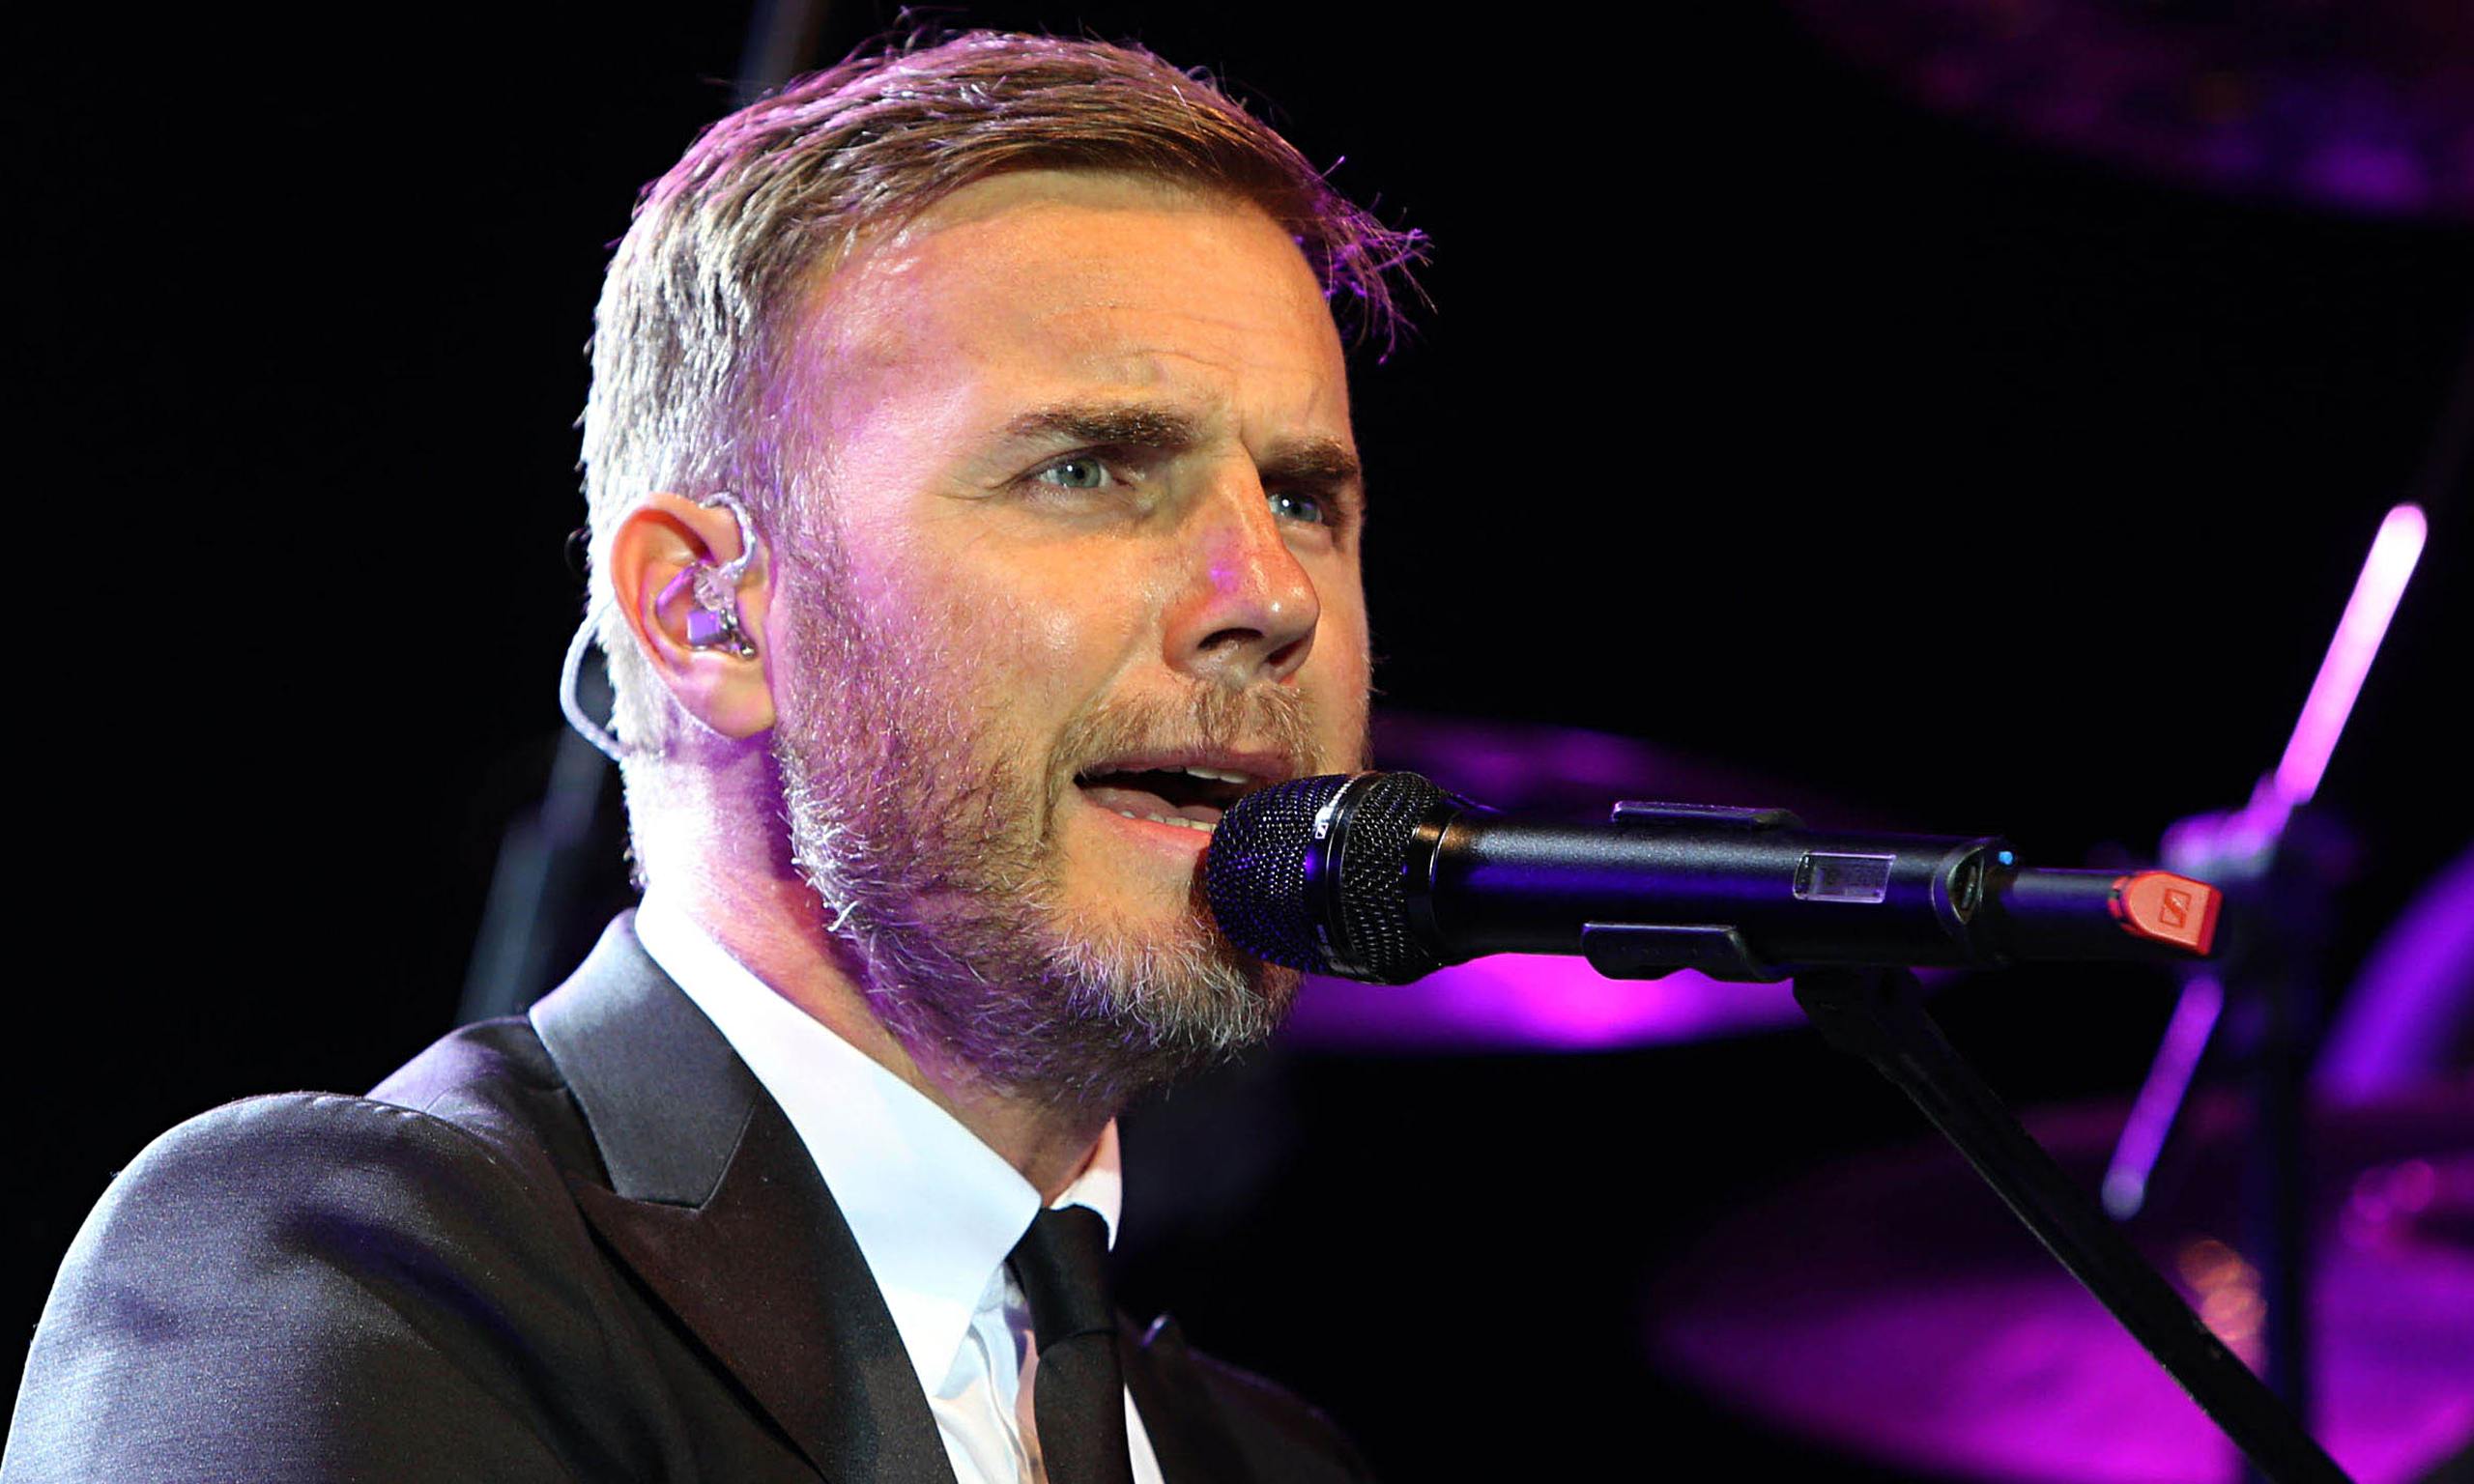 Be It Gary Barlow Or Amazon Lets Stop Making Excuses For Tax Avoiders